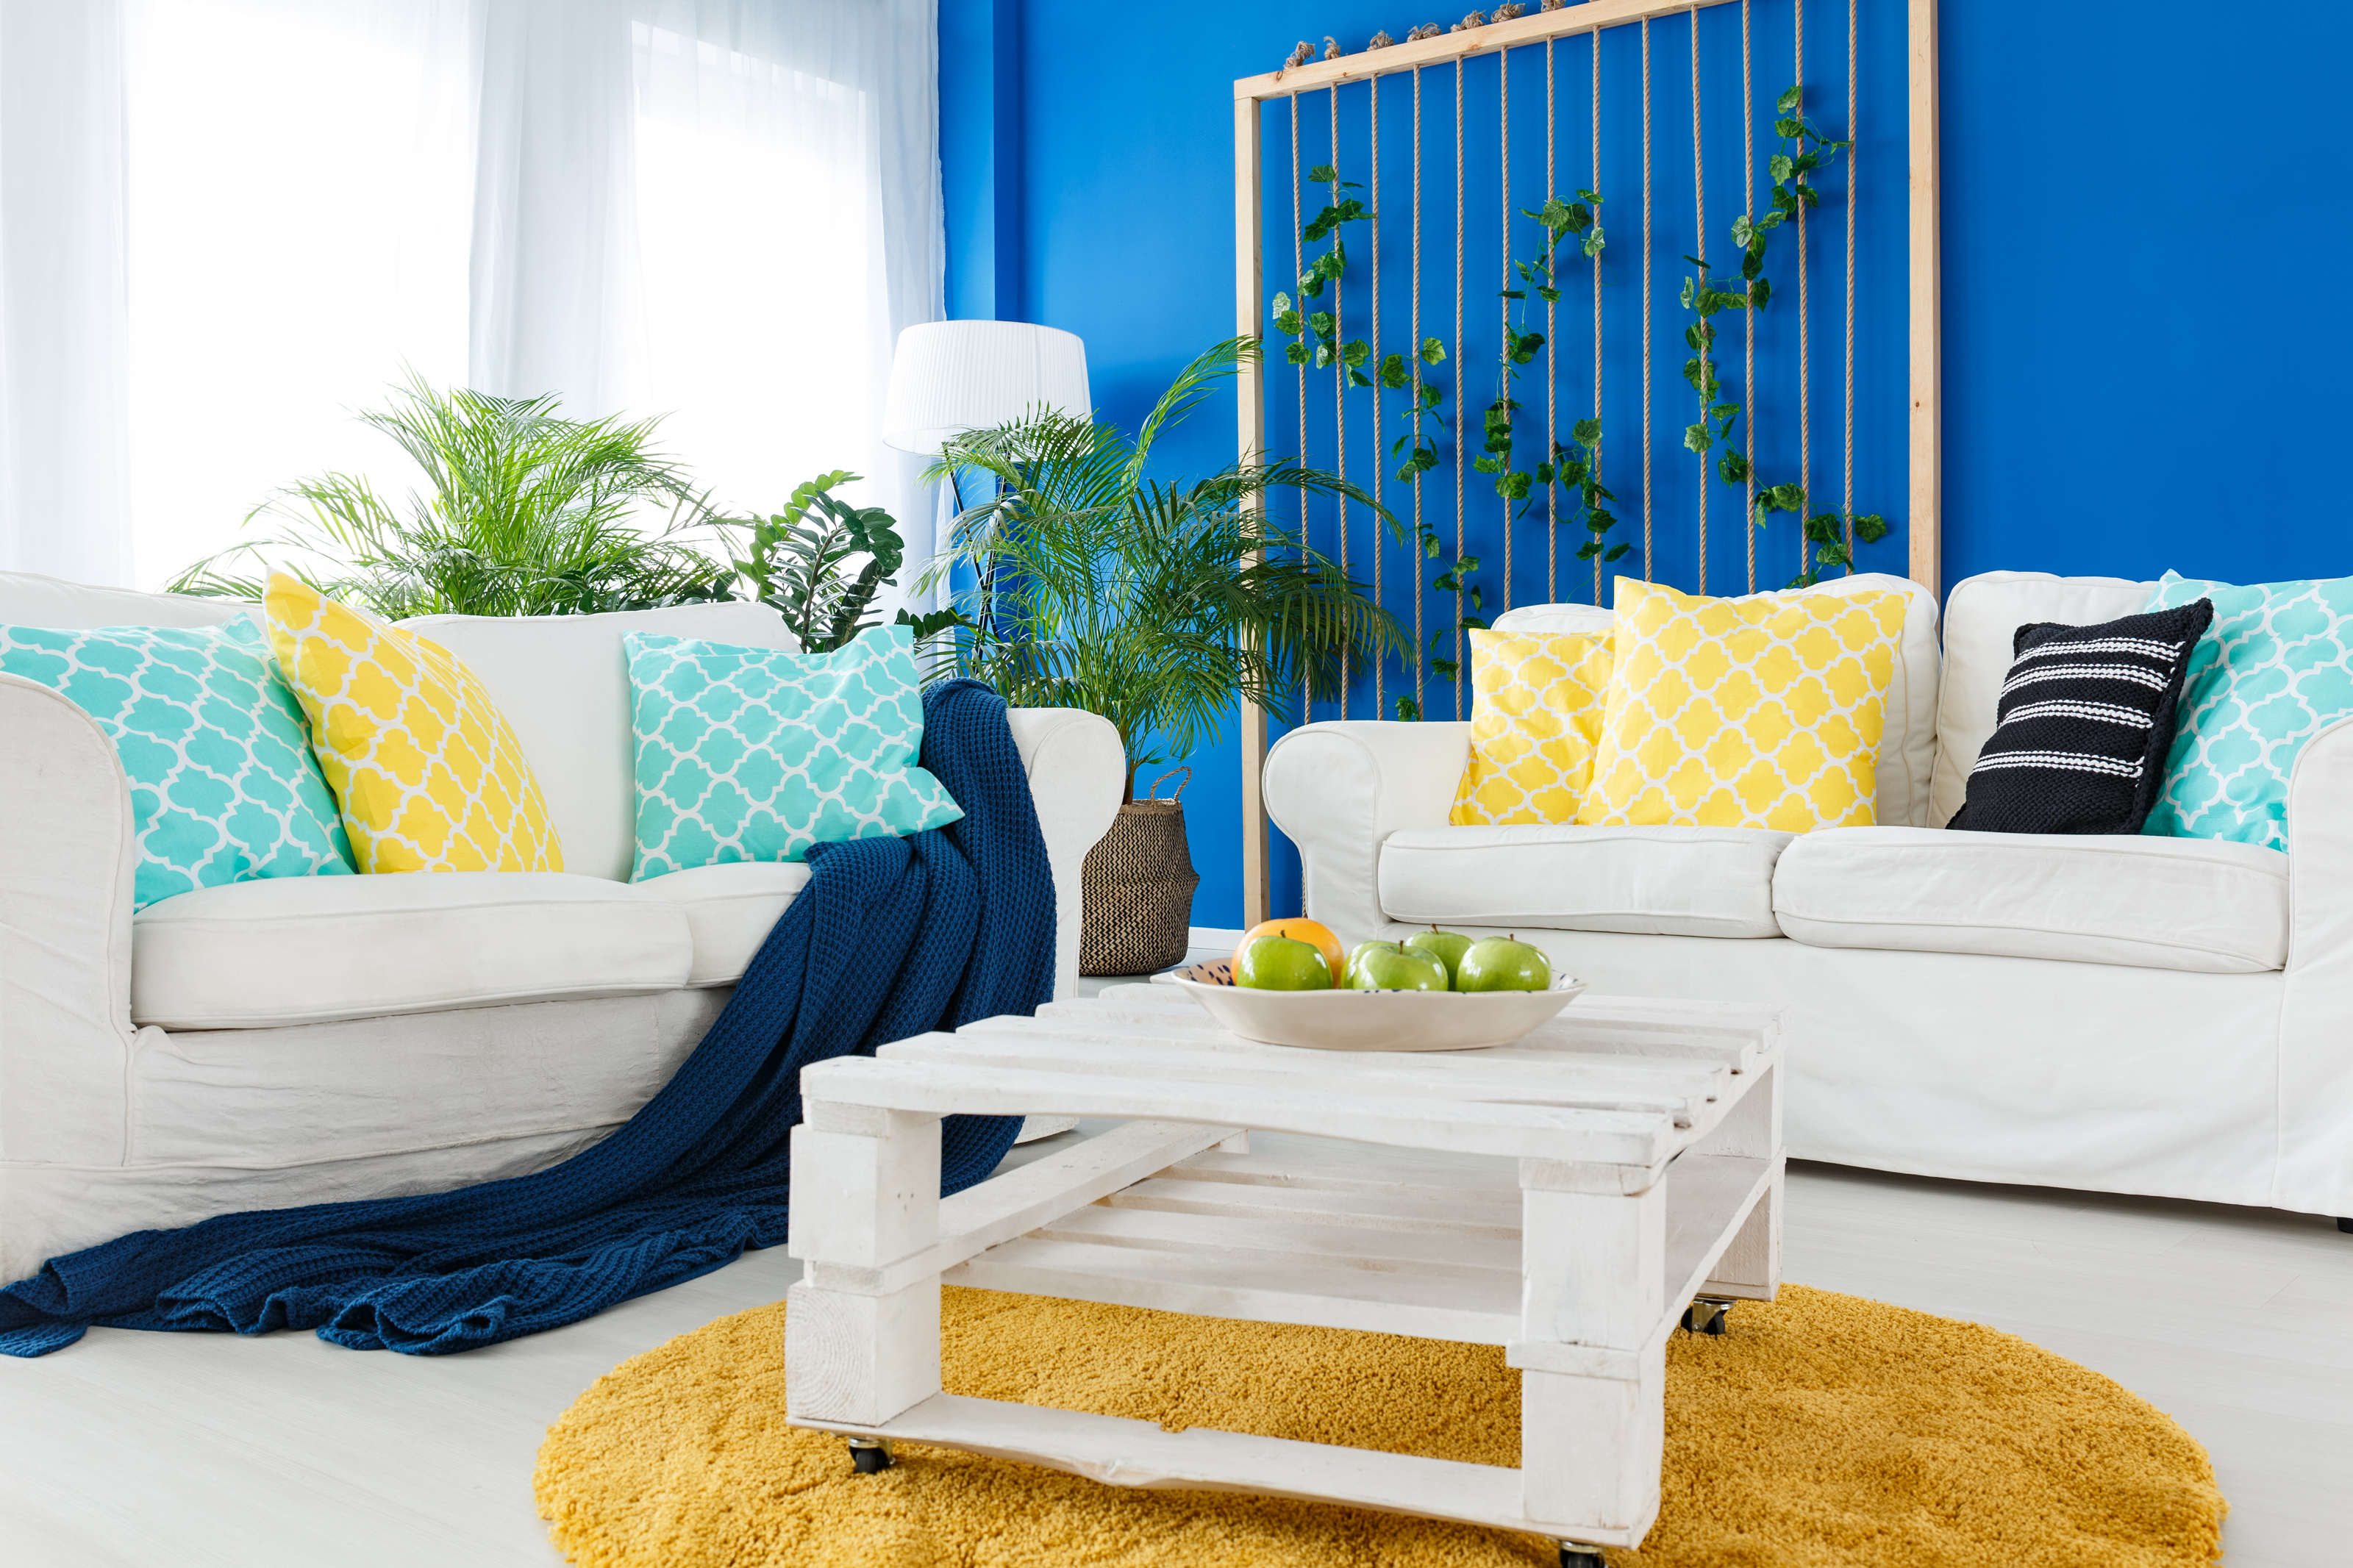 Up-to-date decor of spacious living room with colorful walls, white furniture, and bright accents.